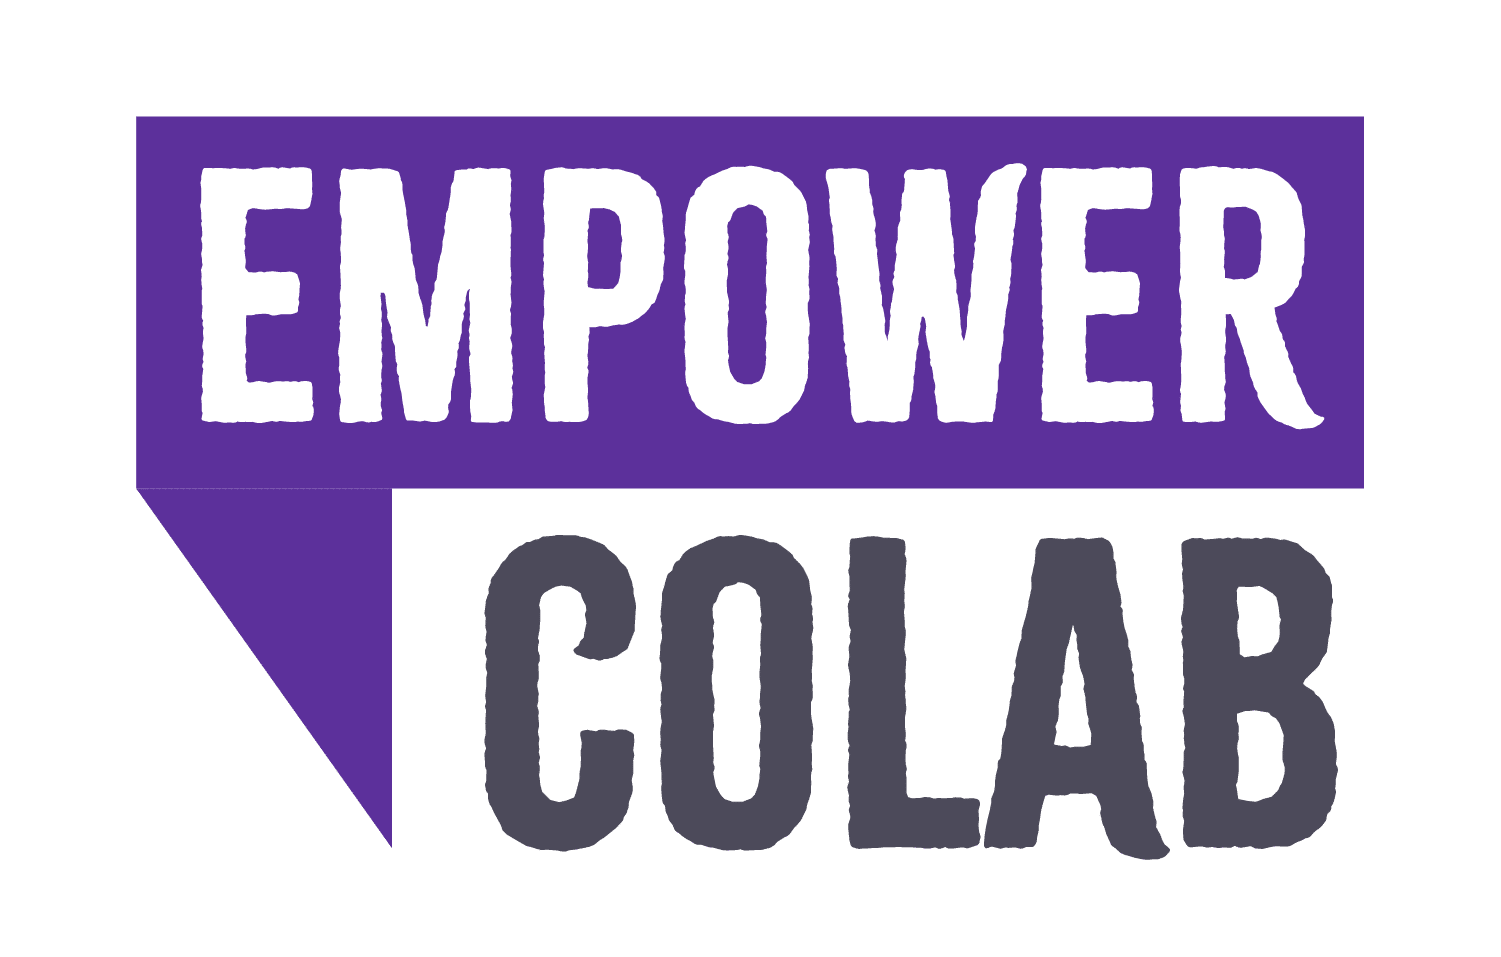 Empower Colab logo. Text in speech bubbles.